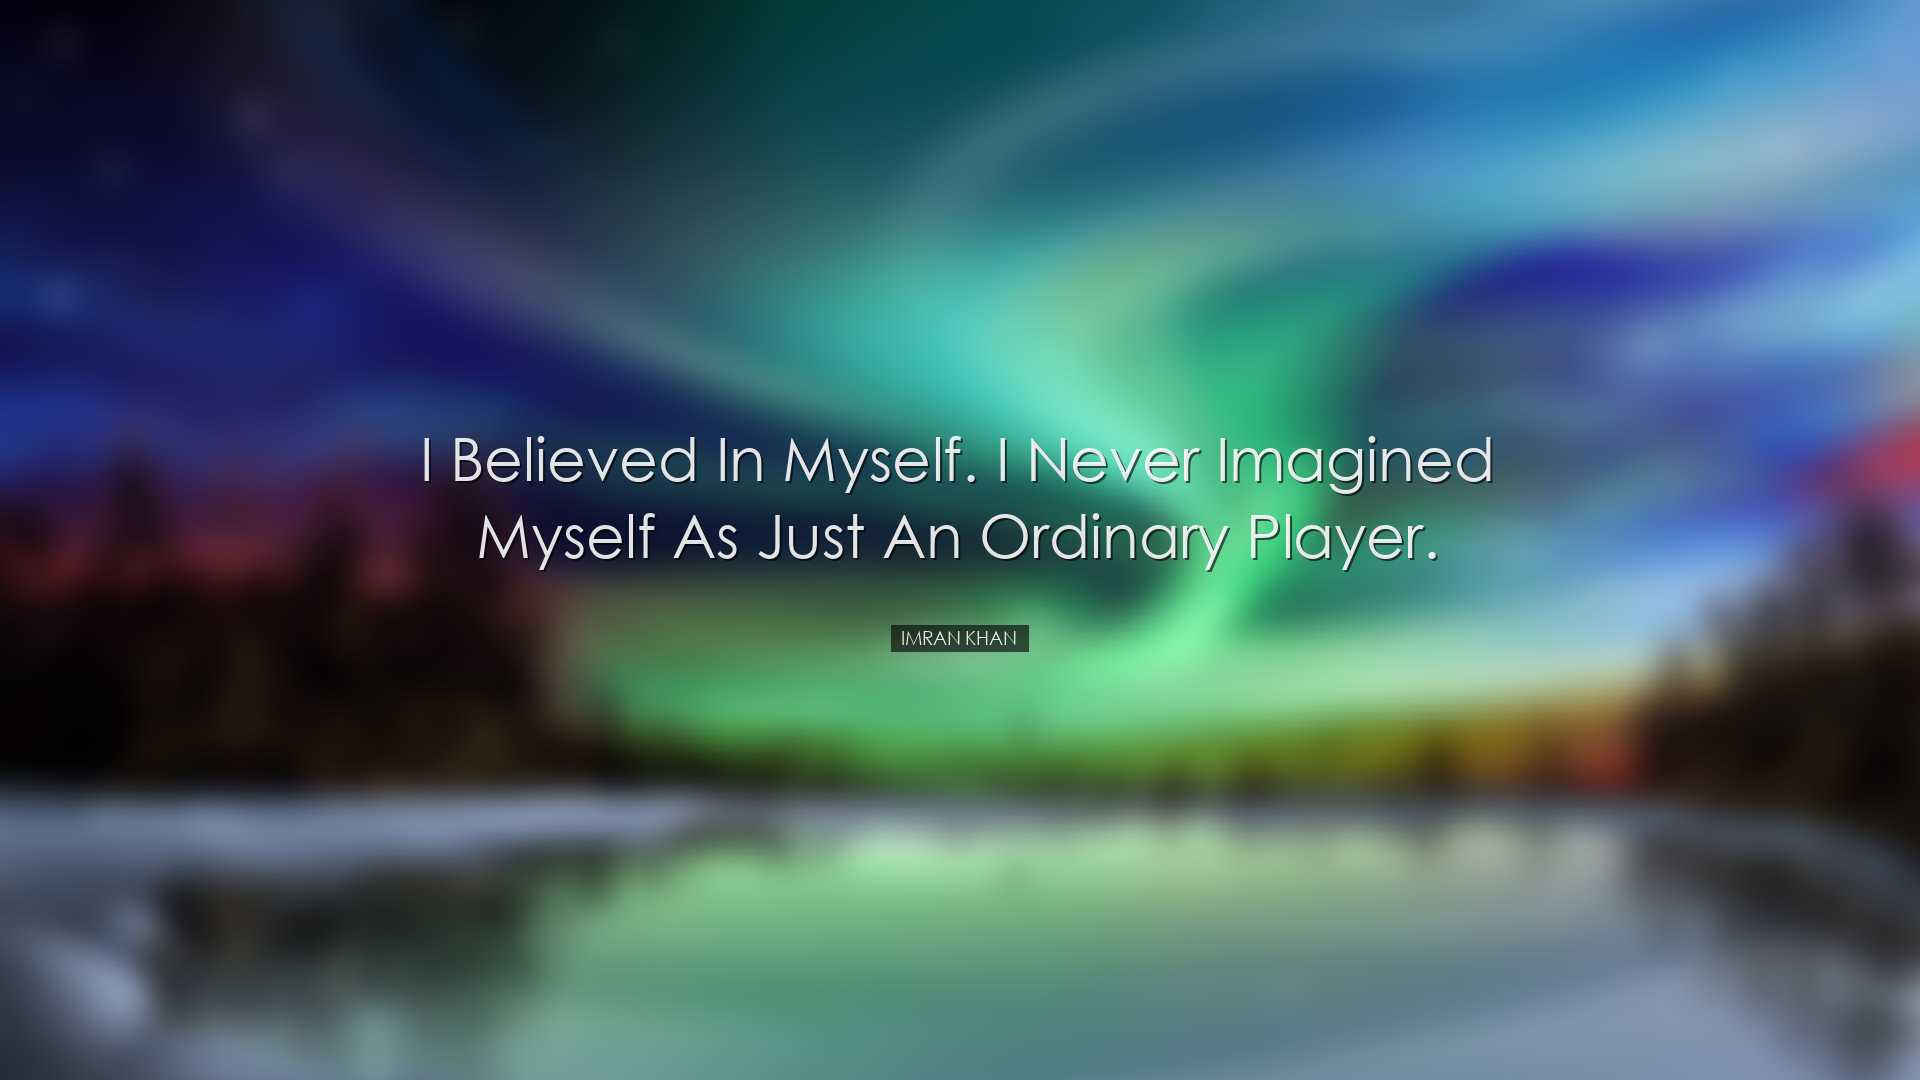 I believed in myself. I never imagined myself as just an ordinary